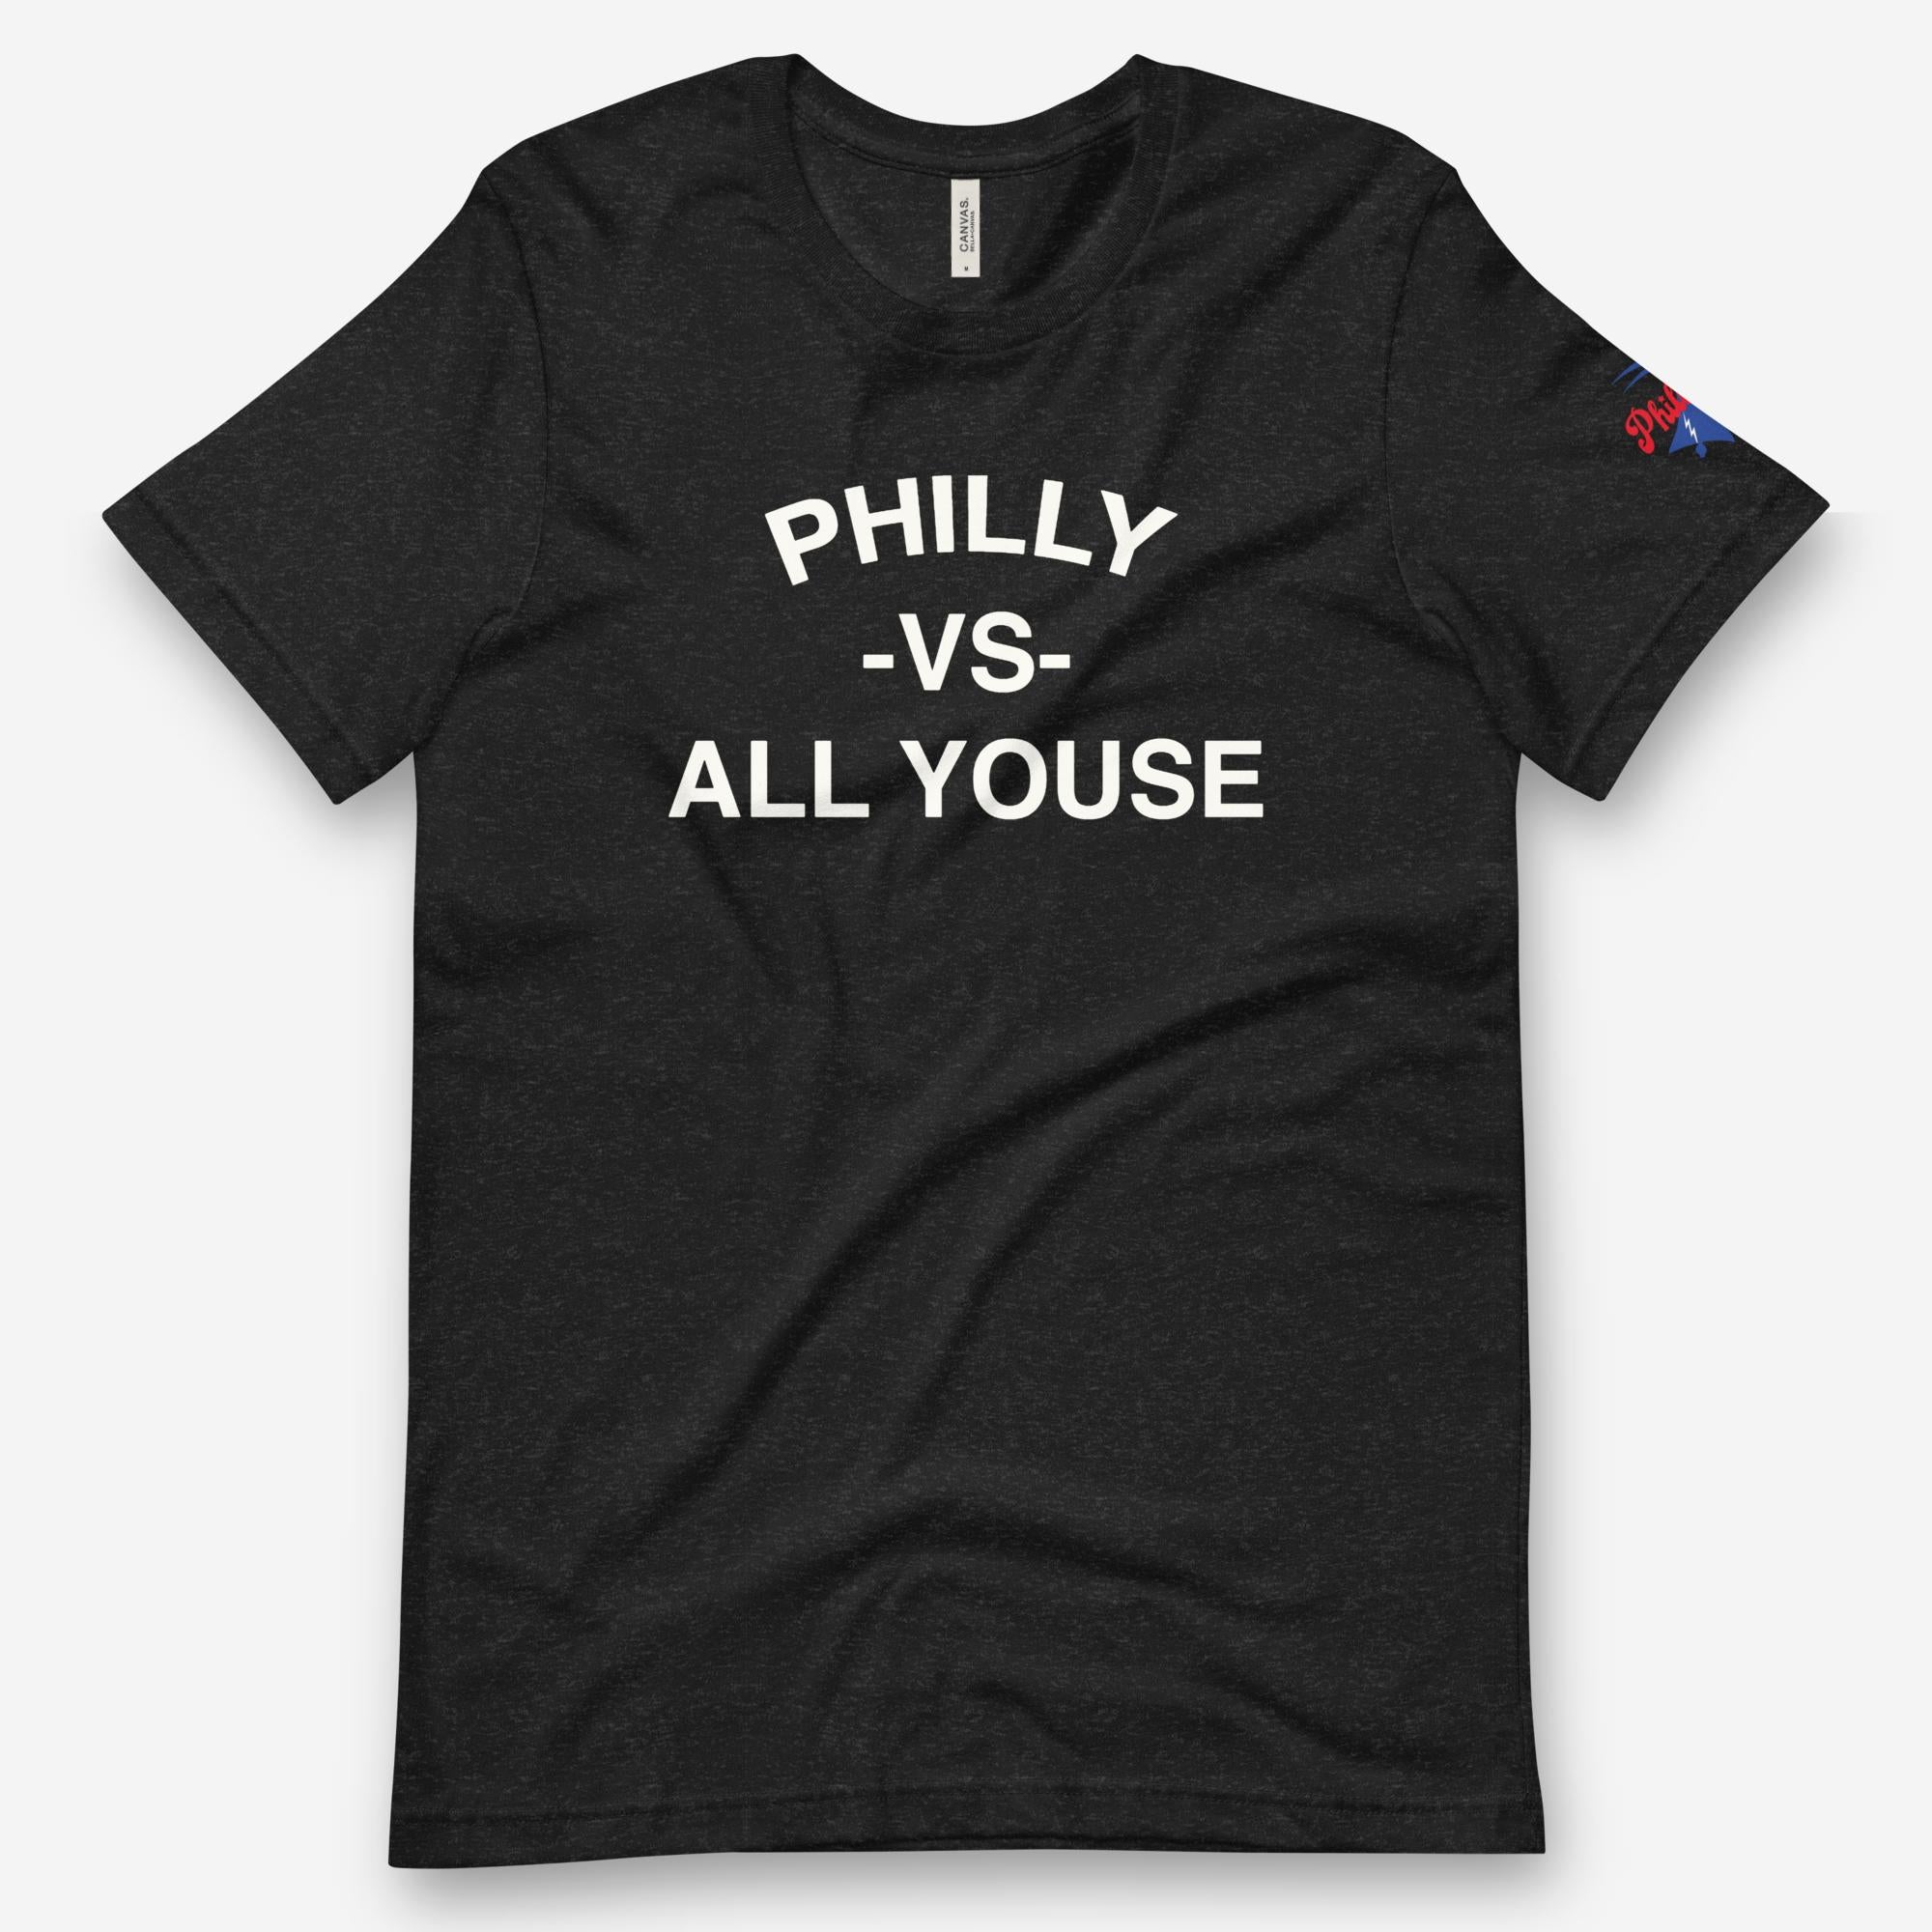 "Philly vs. All Youse" Tee